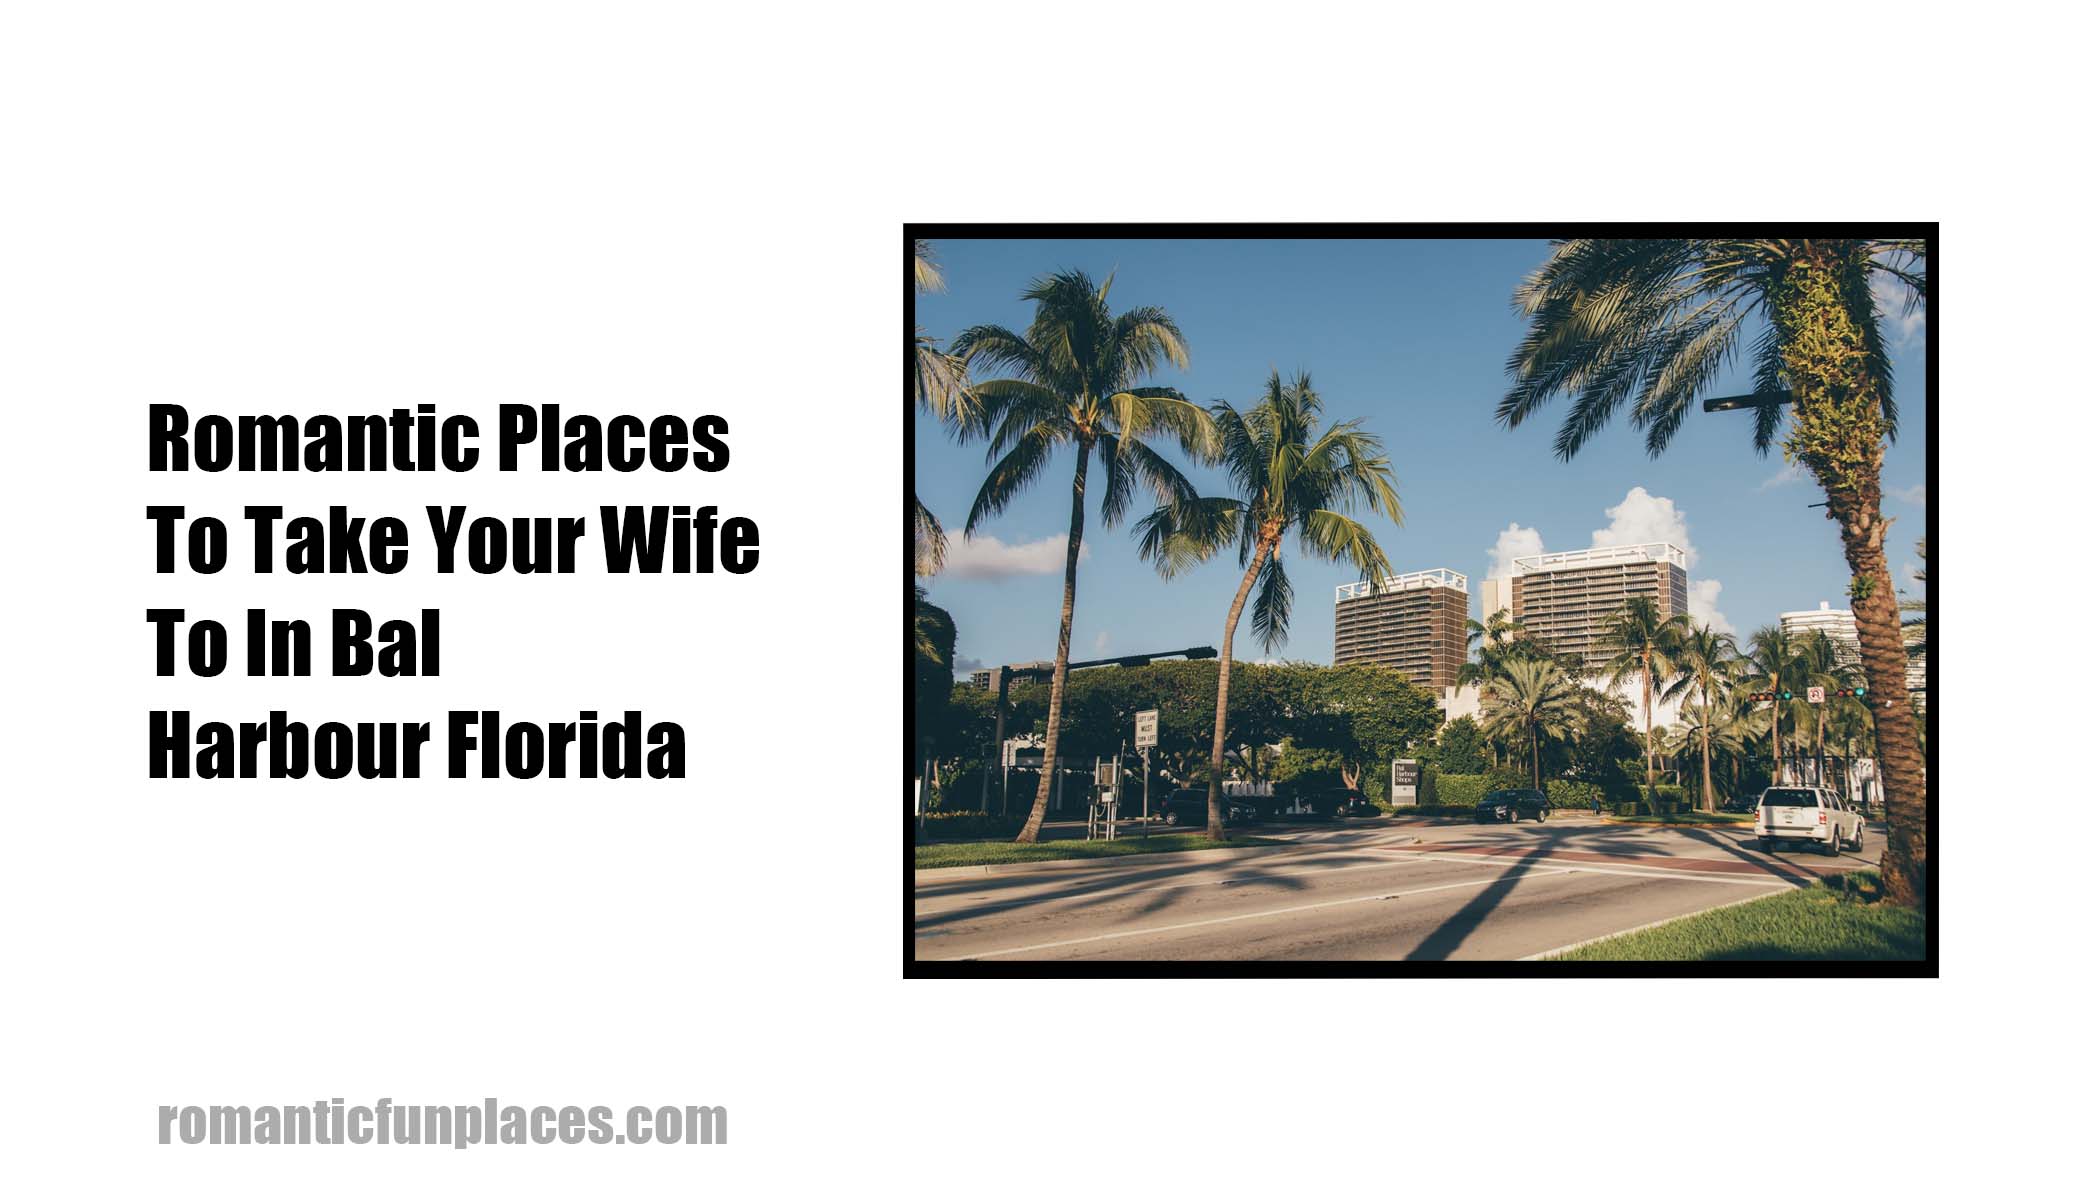 Romantic Places To Take Your Wife To In Bal Harbour Florida